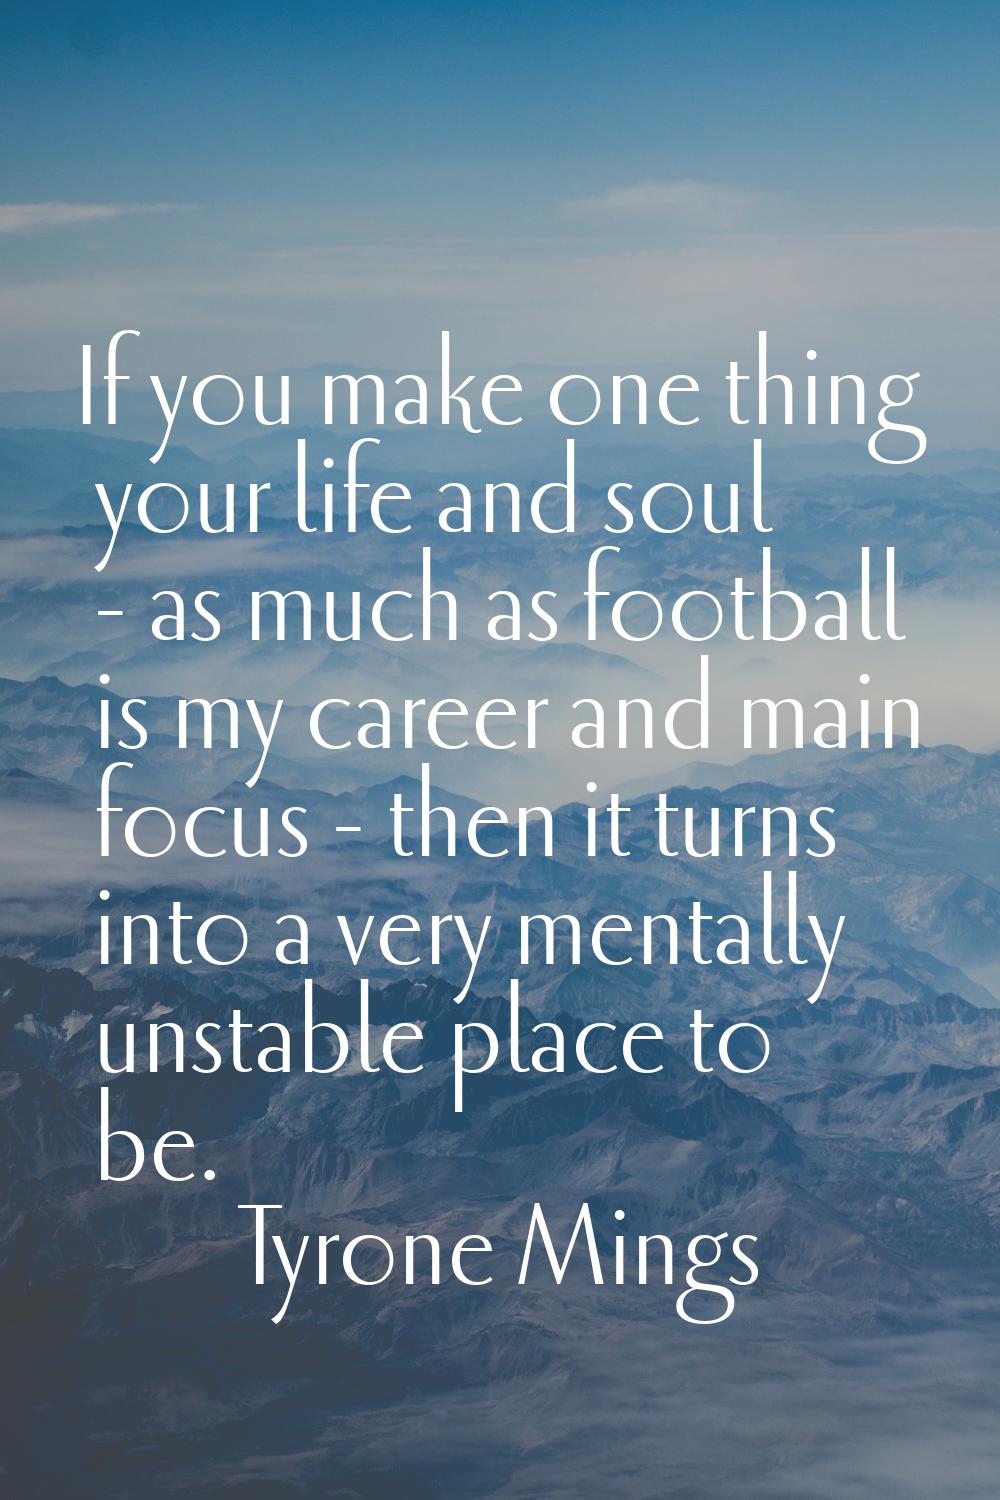 If you make one thing your life and soul - as much as football is my career and main focus - then i